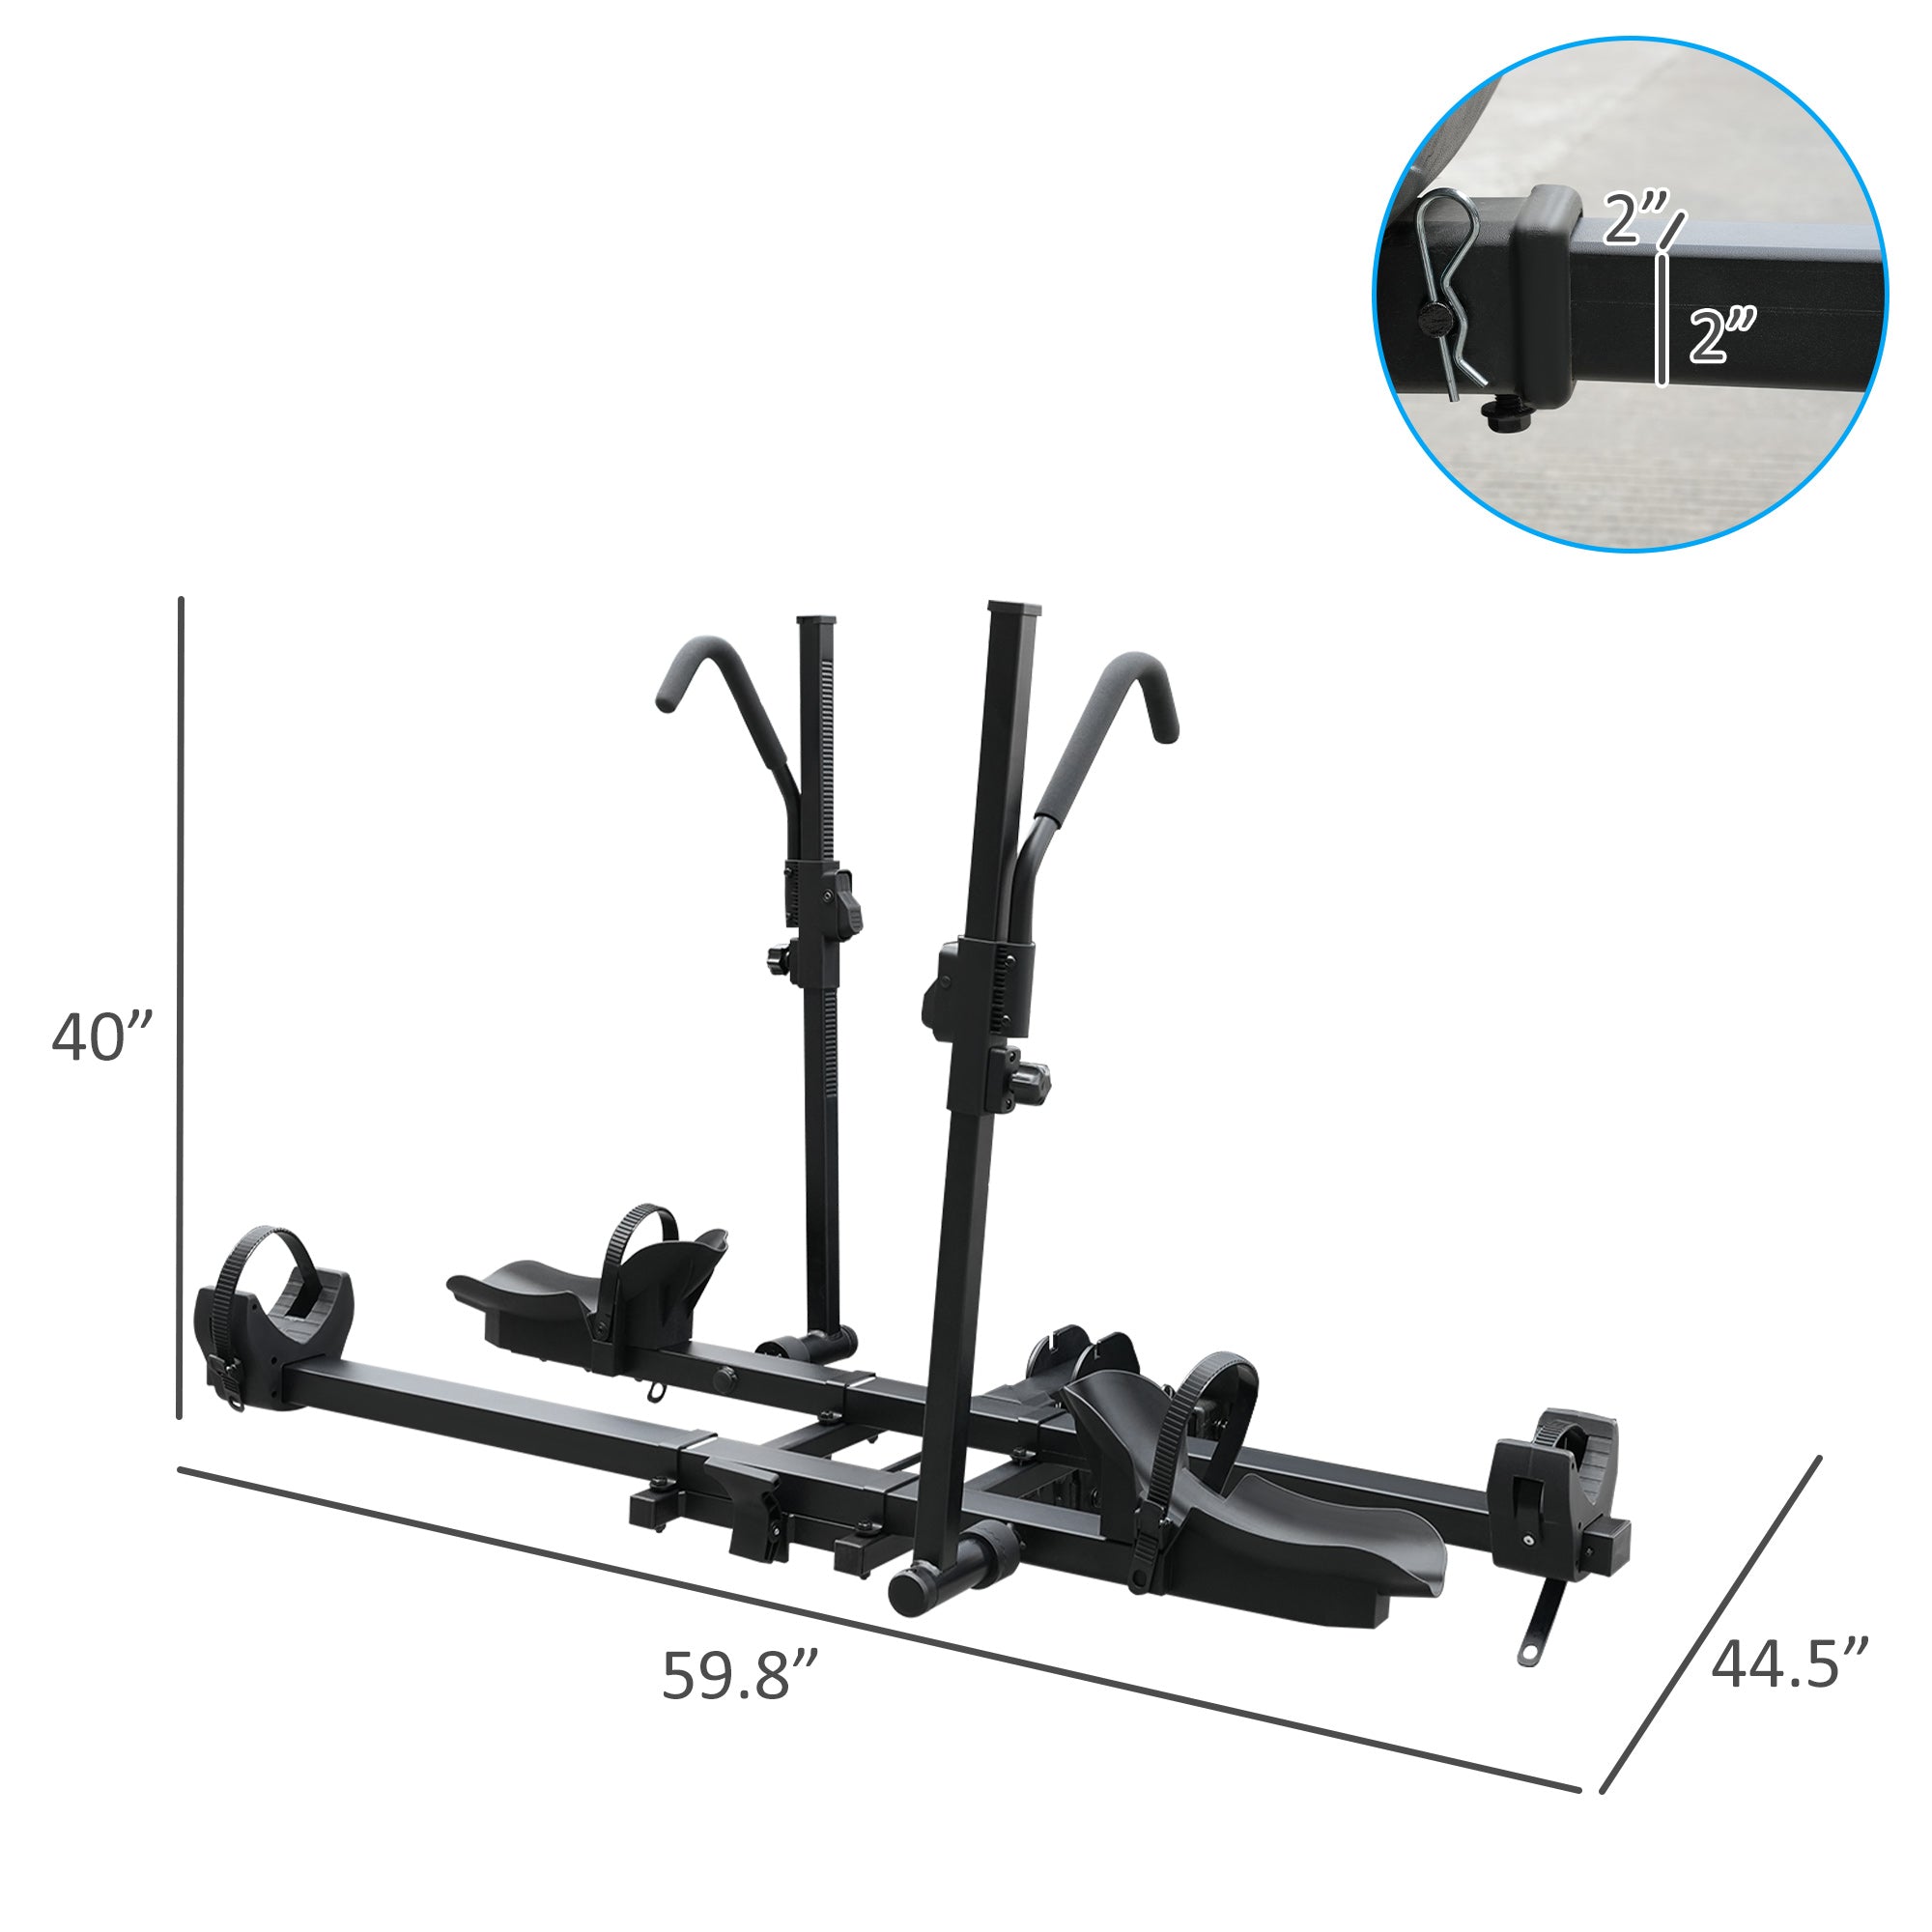 Platform Style Hitch Mount Bike Rack for 2 Bikes Carrier for Car SUV with 2" Hitch Receiver